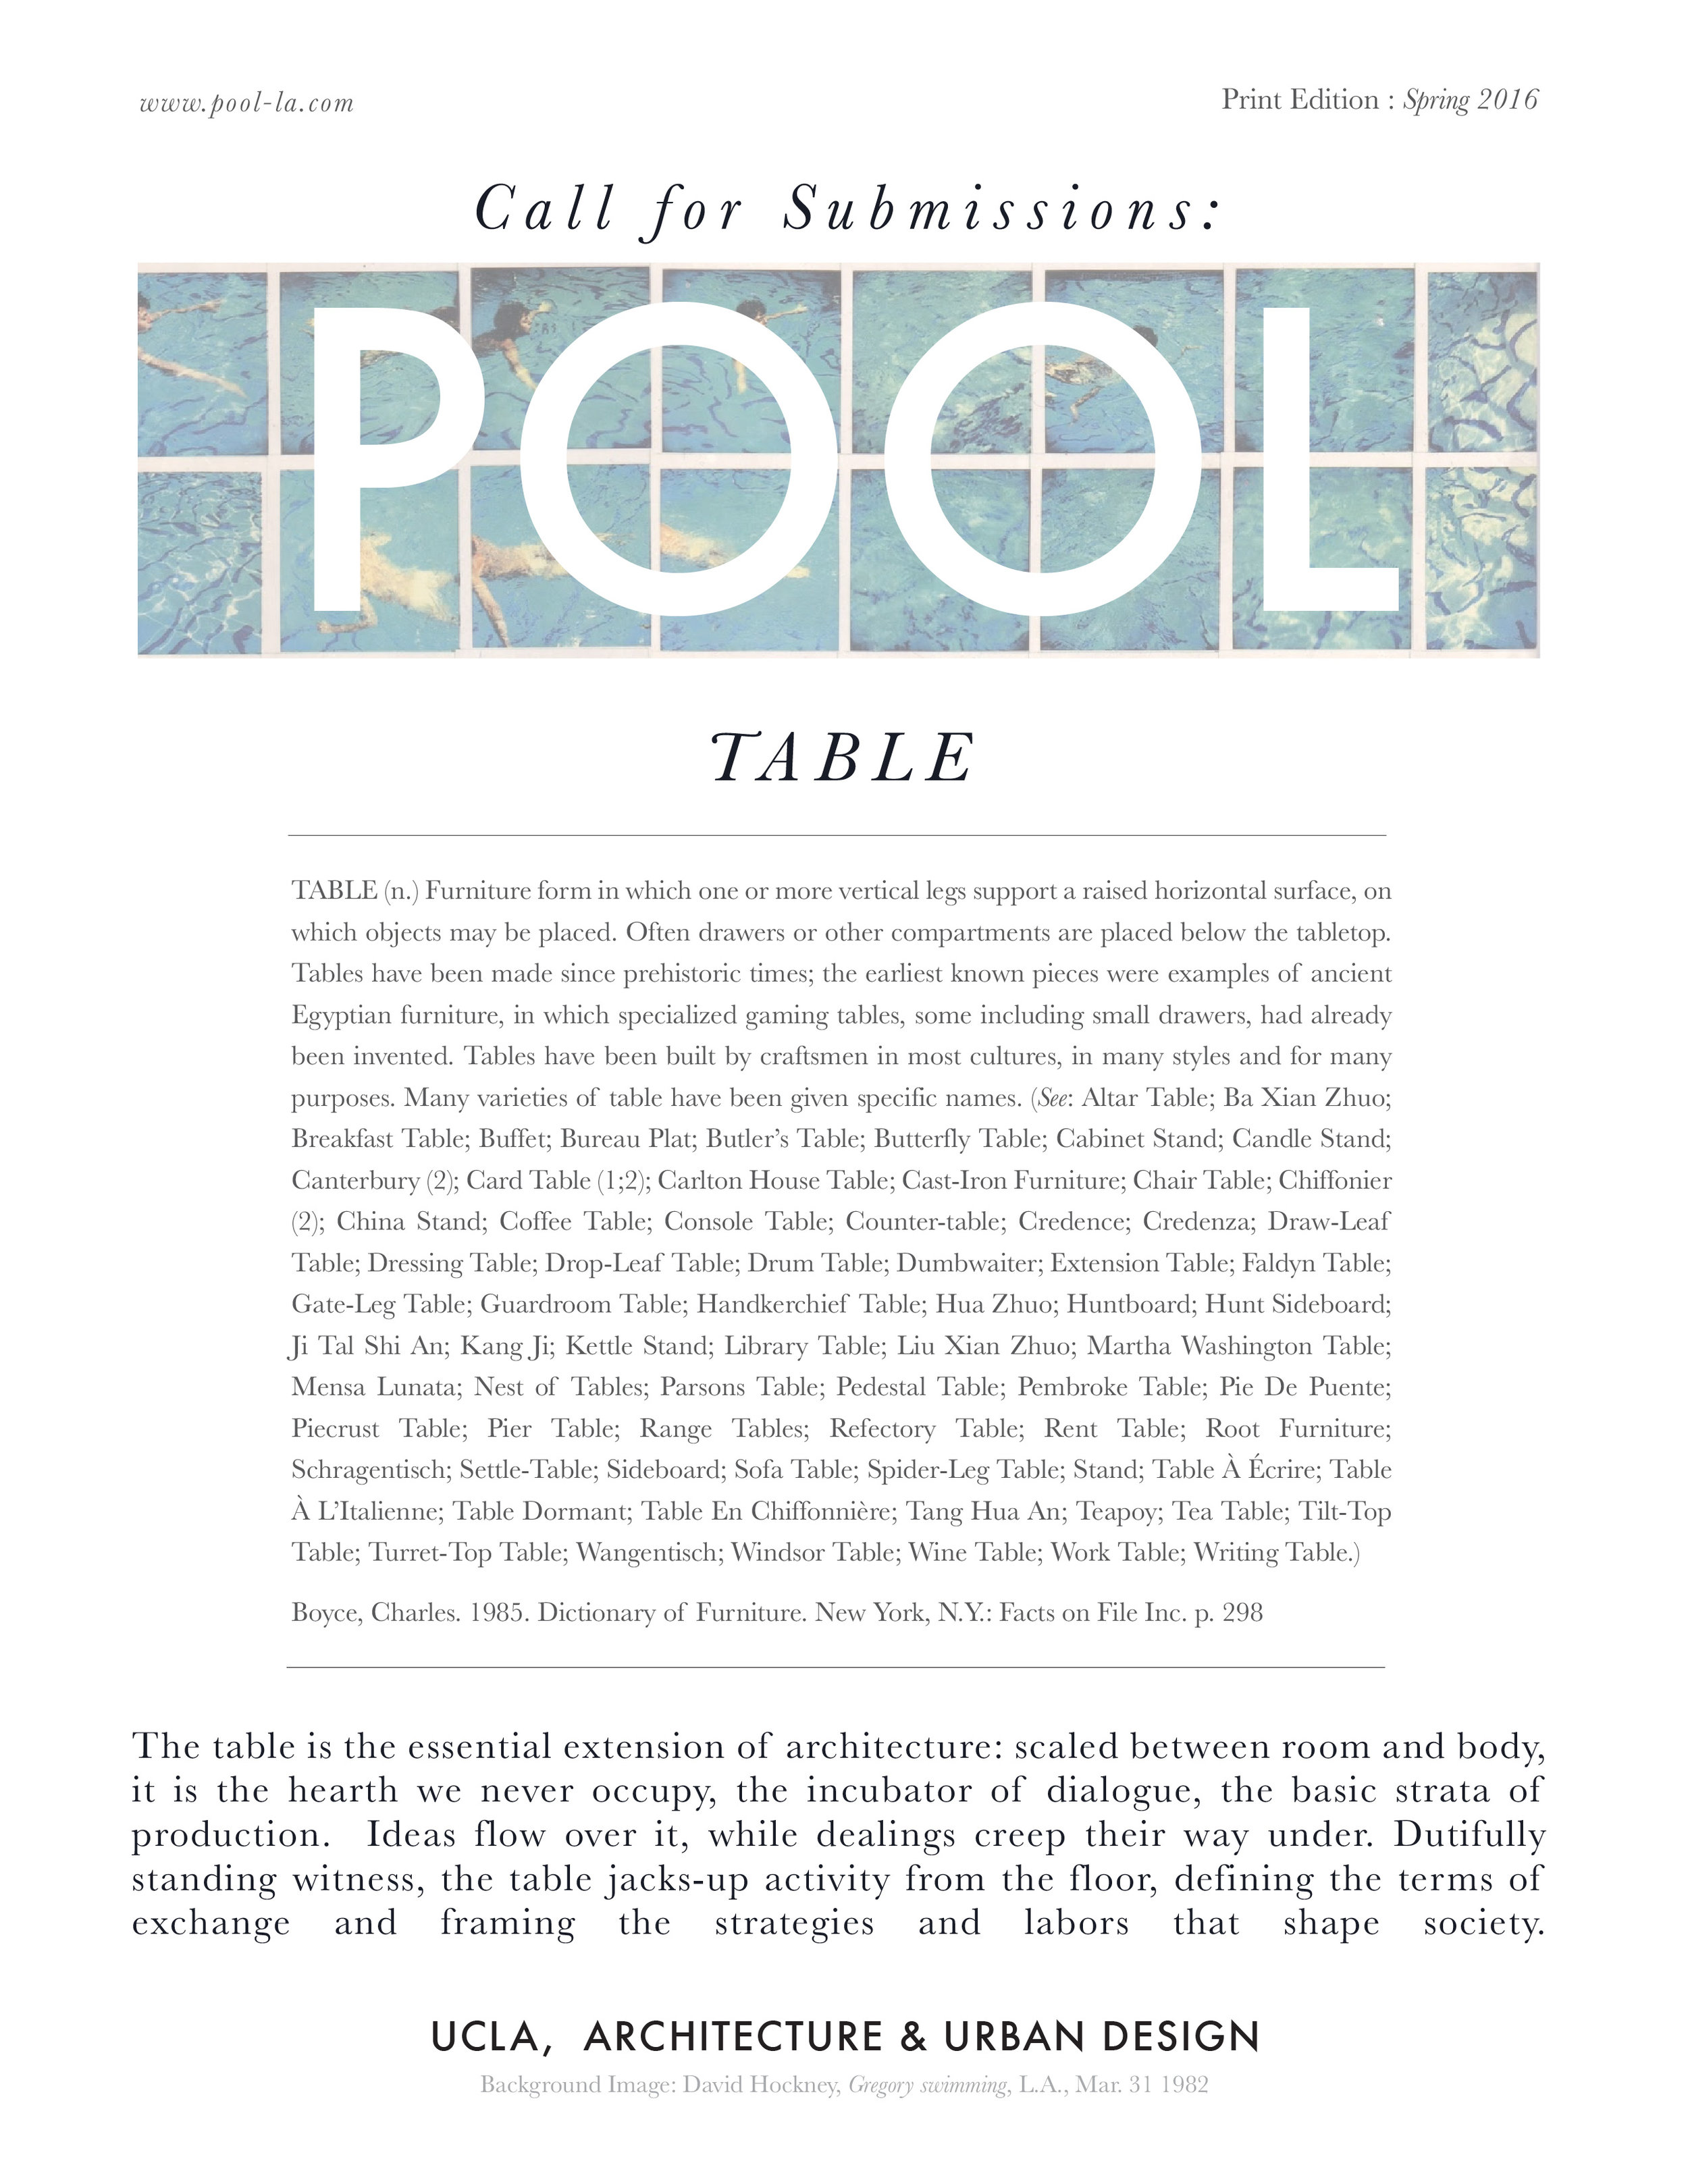 Issue No.1: TABLE (Copy)